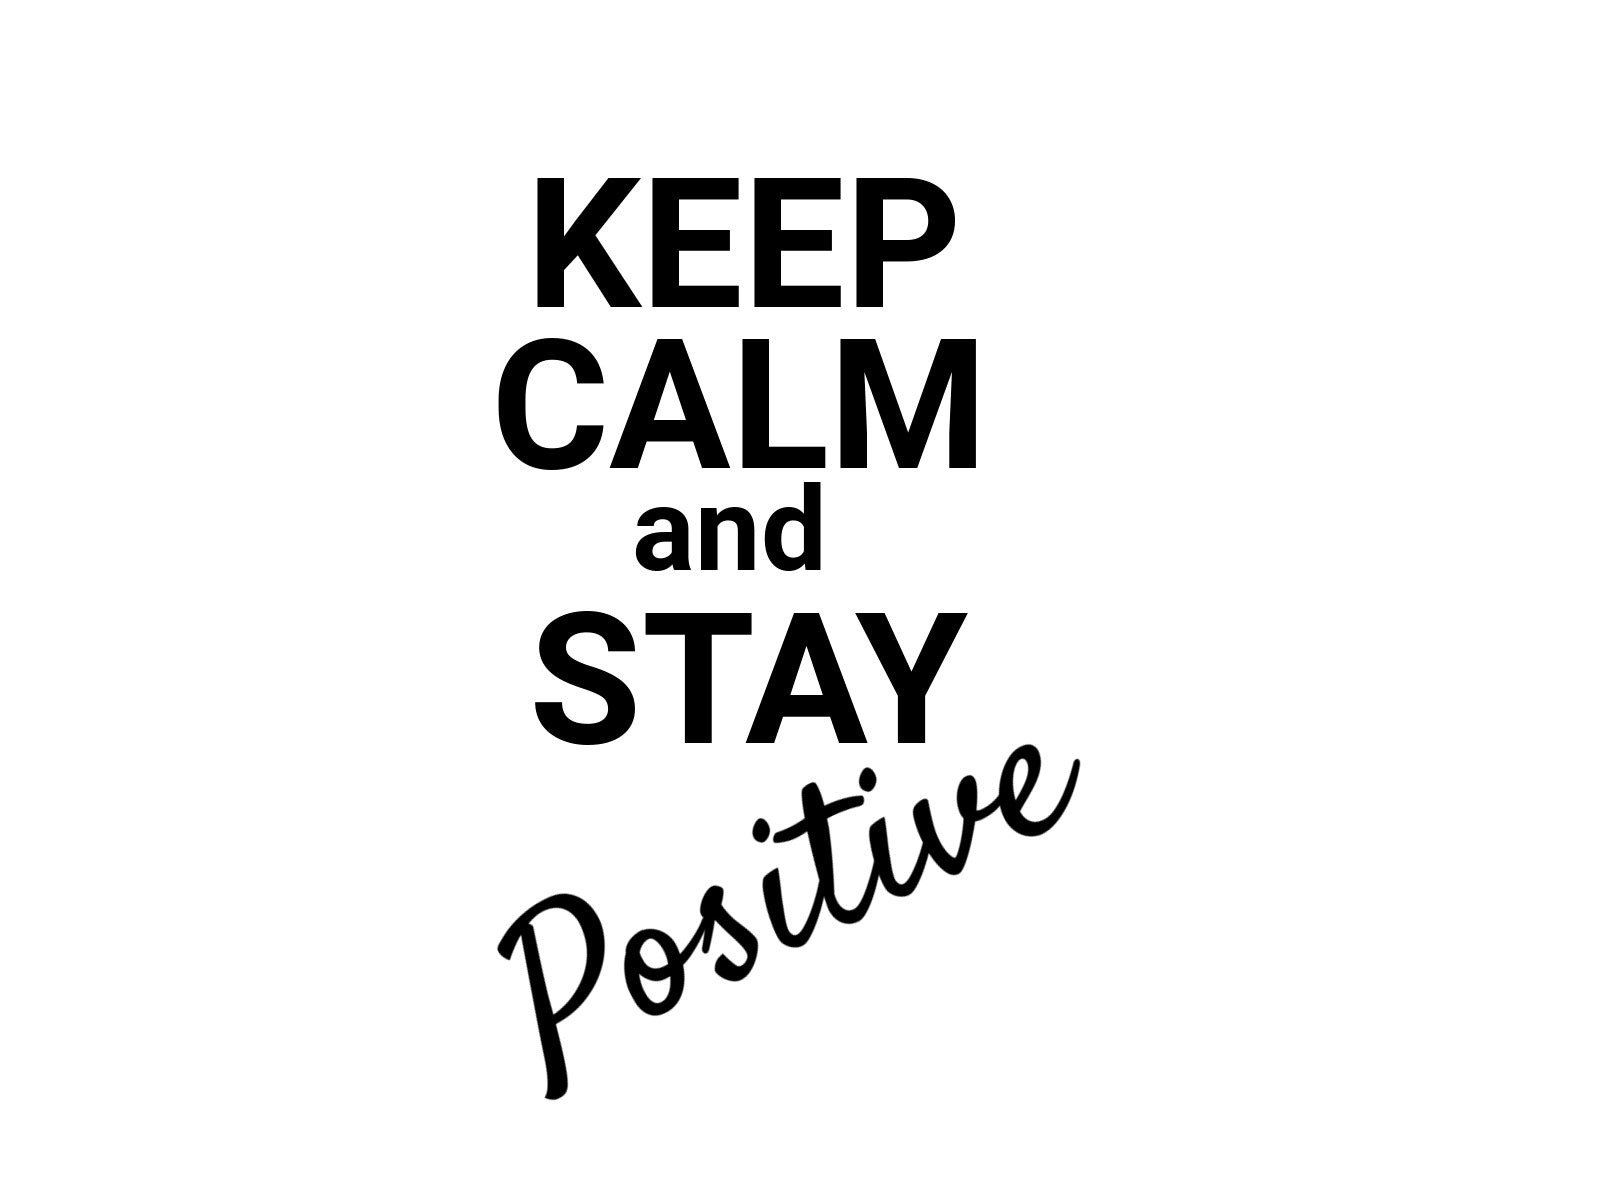 Keep Calm and Stay Positive